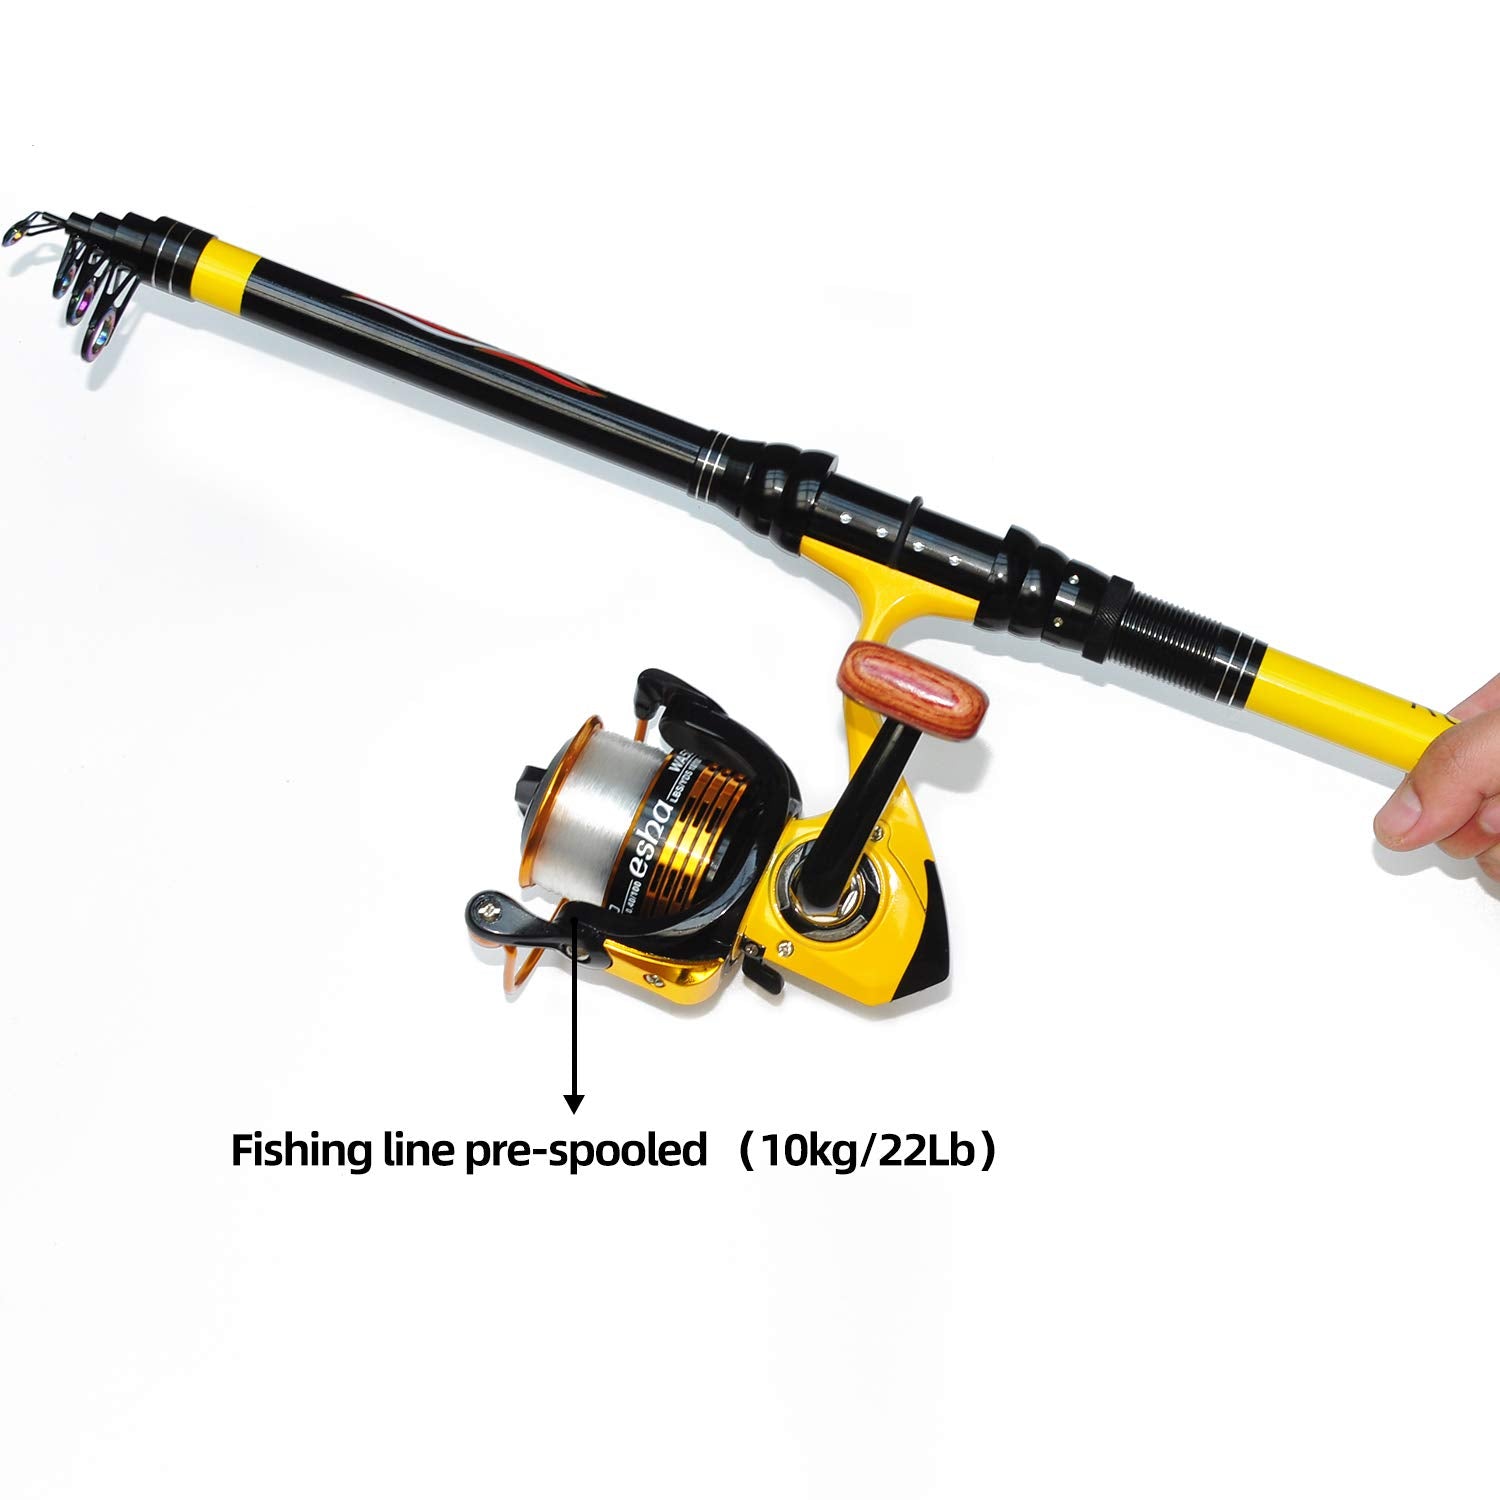 Richcat Fishing Poles and Reels Combo, Fishing Rod and Reel Kits for Adults Telescopic Fishing Rod Set Line Pre-Spooled for Trav, Black